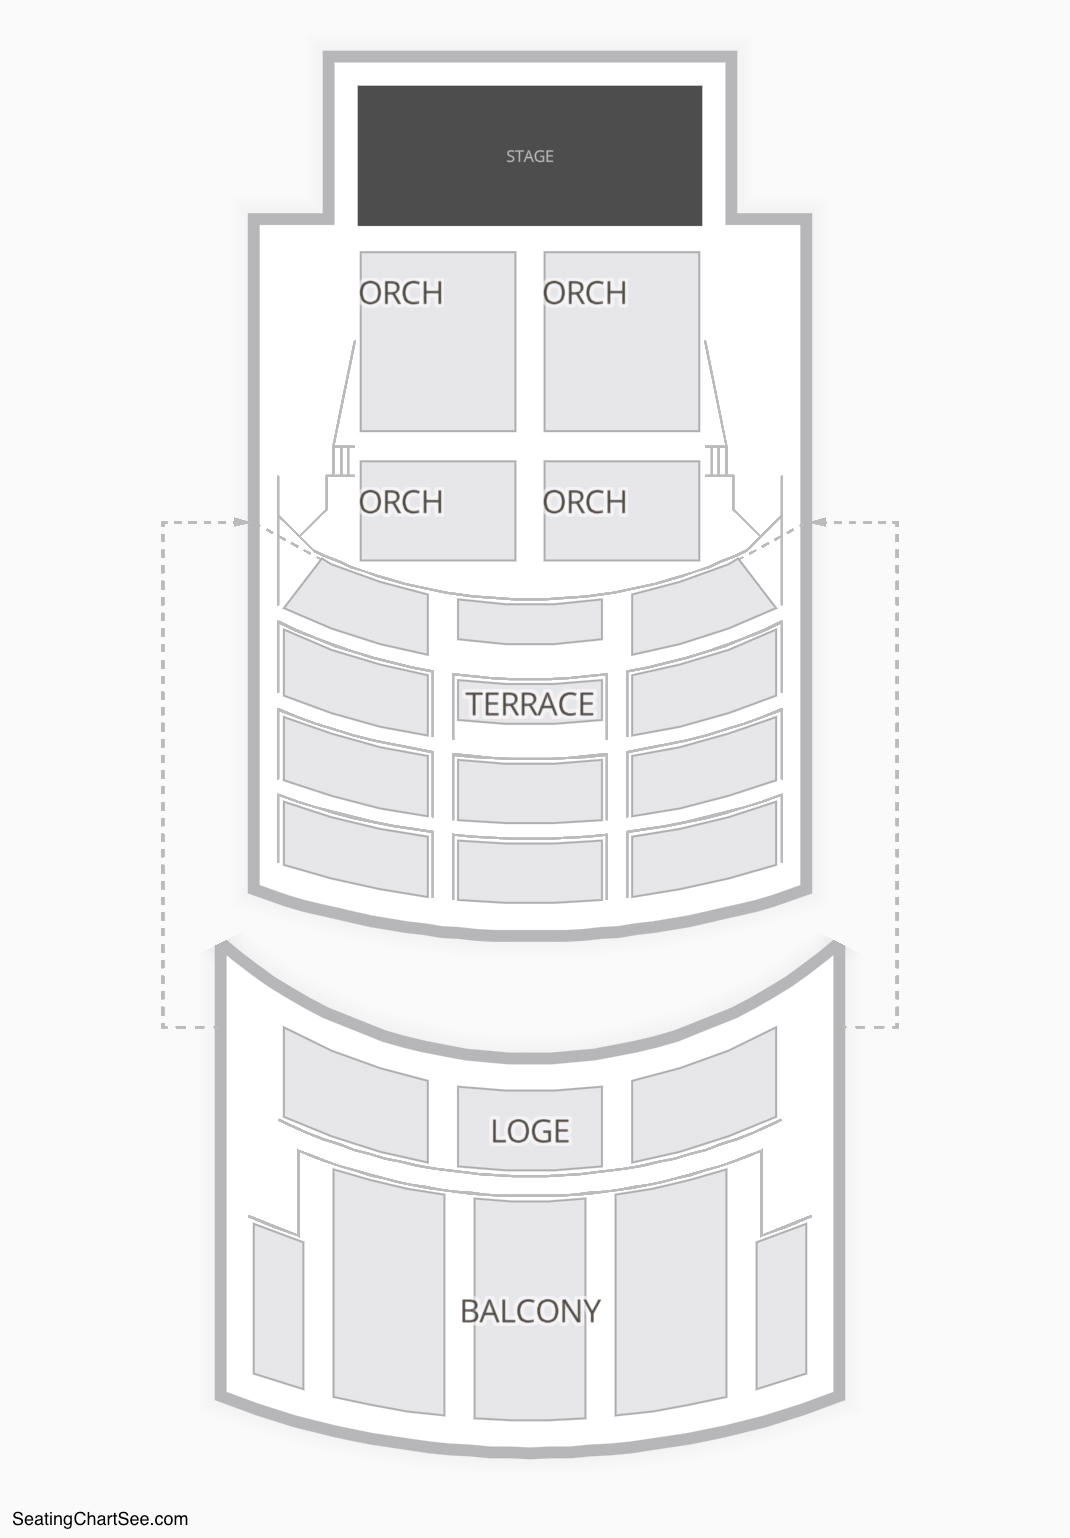 Fox Theater Pomona Seating Chart | Seating Charts & Tickets